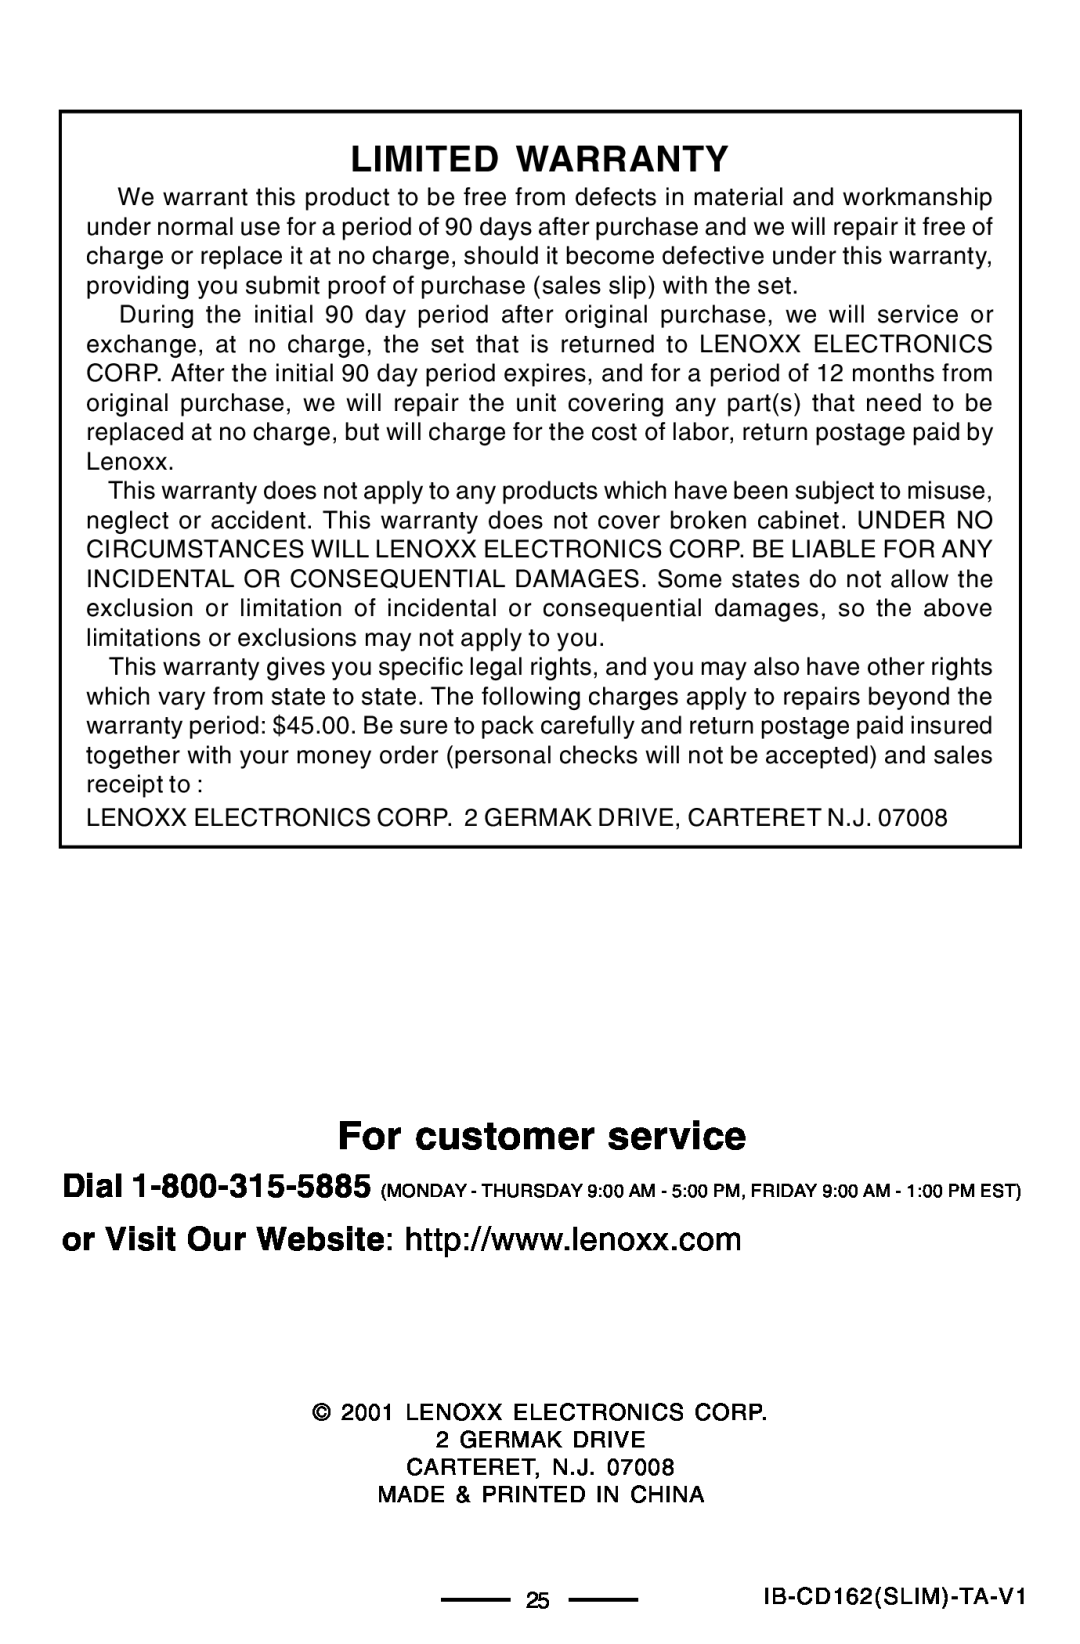 Lenoxx Electronics CD-162 operating instructions For customer service, Limited Warranty 